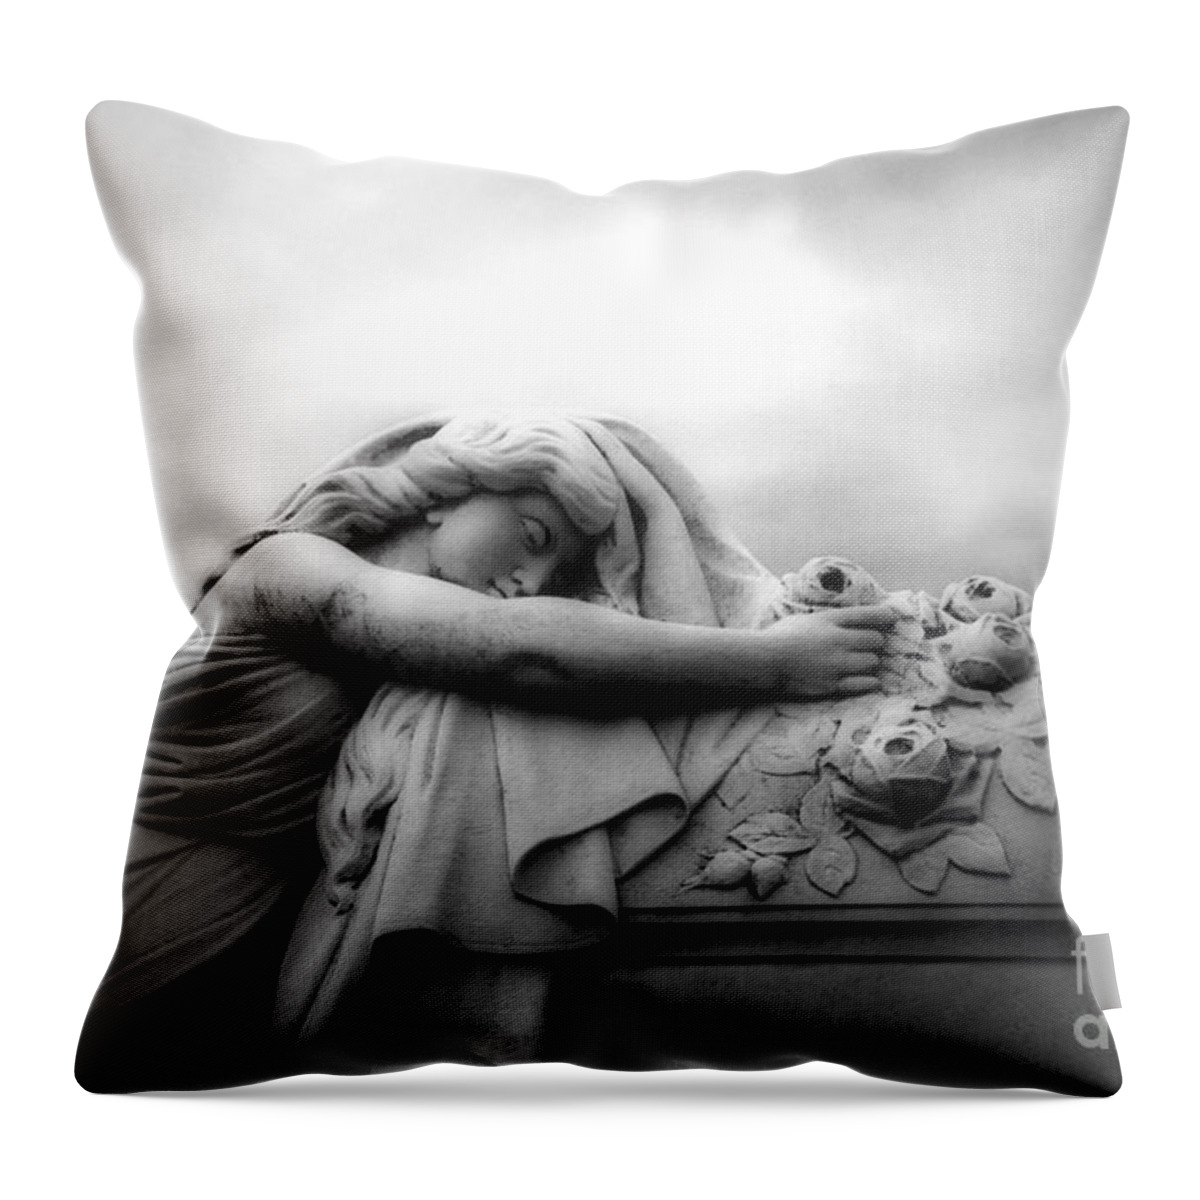 Grave Throw Pillow featuring the photograph Cemetery Grave Mourner Black White Surreal Coffin Grave Art - Angel Mourner Across Rose Coffin by Kathy Fornal